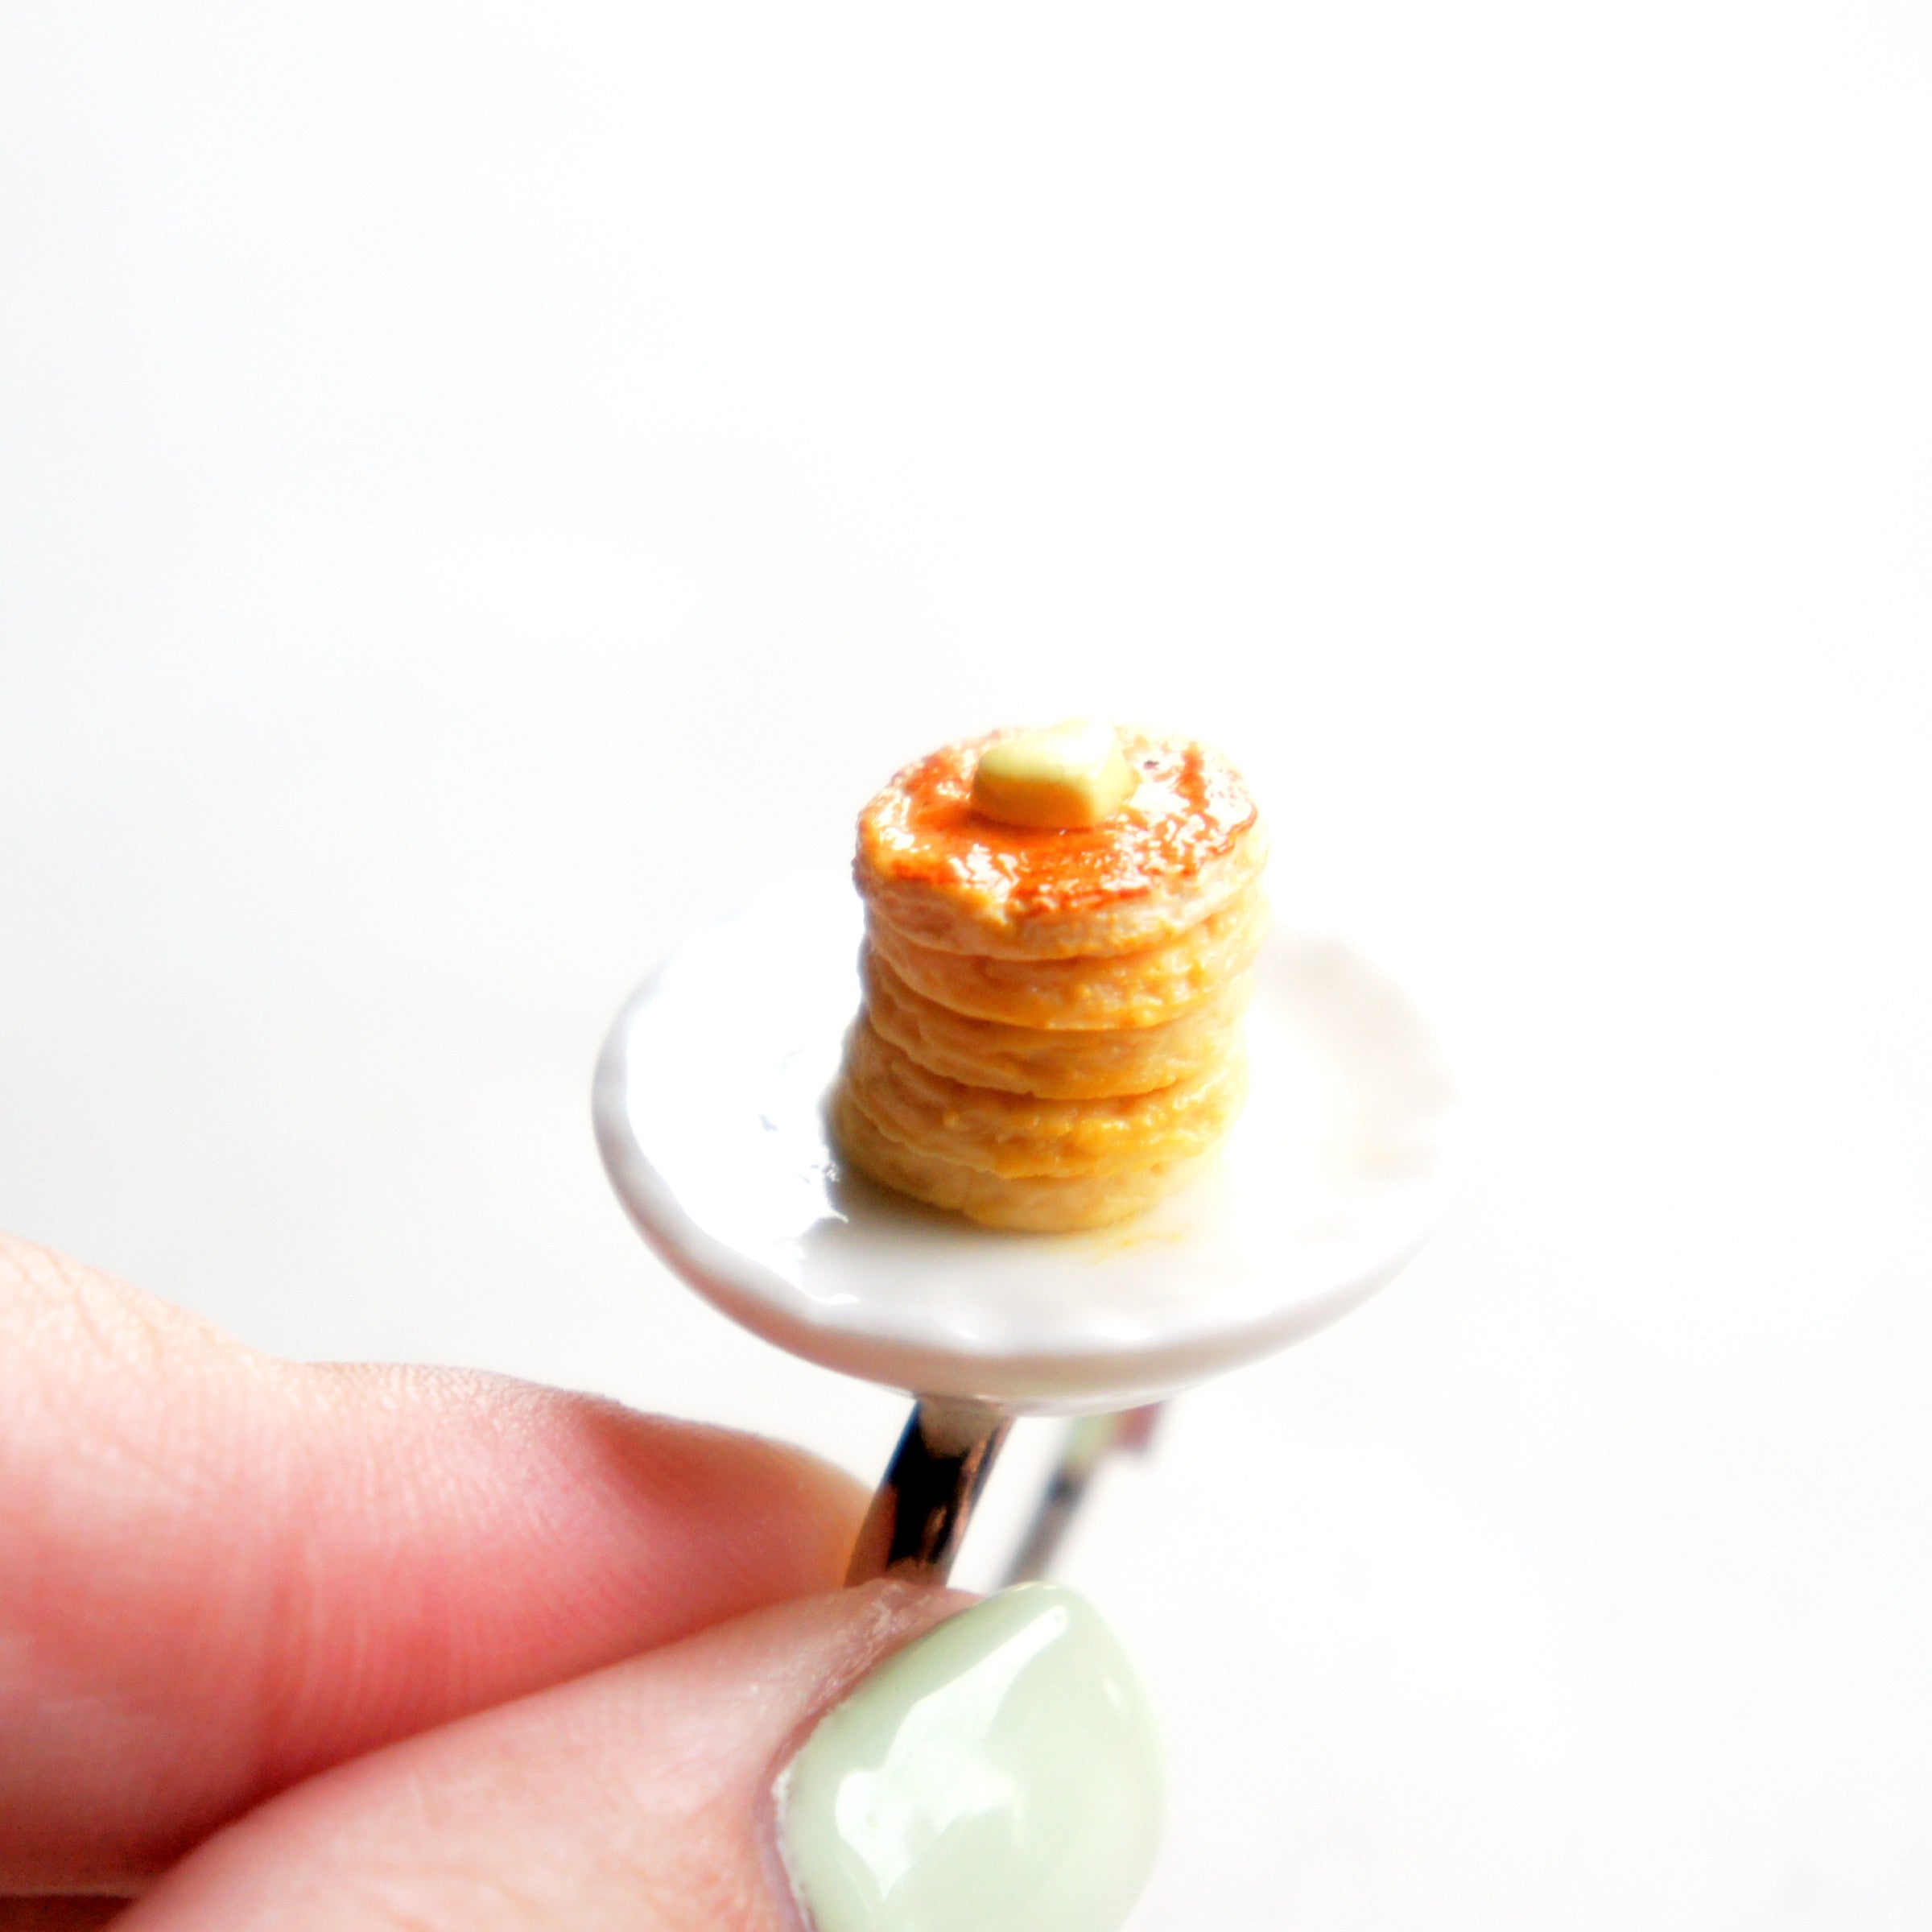 Pancakes Ring - Jillicious charms and accessories